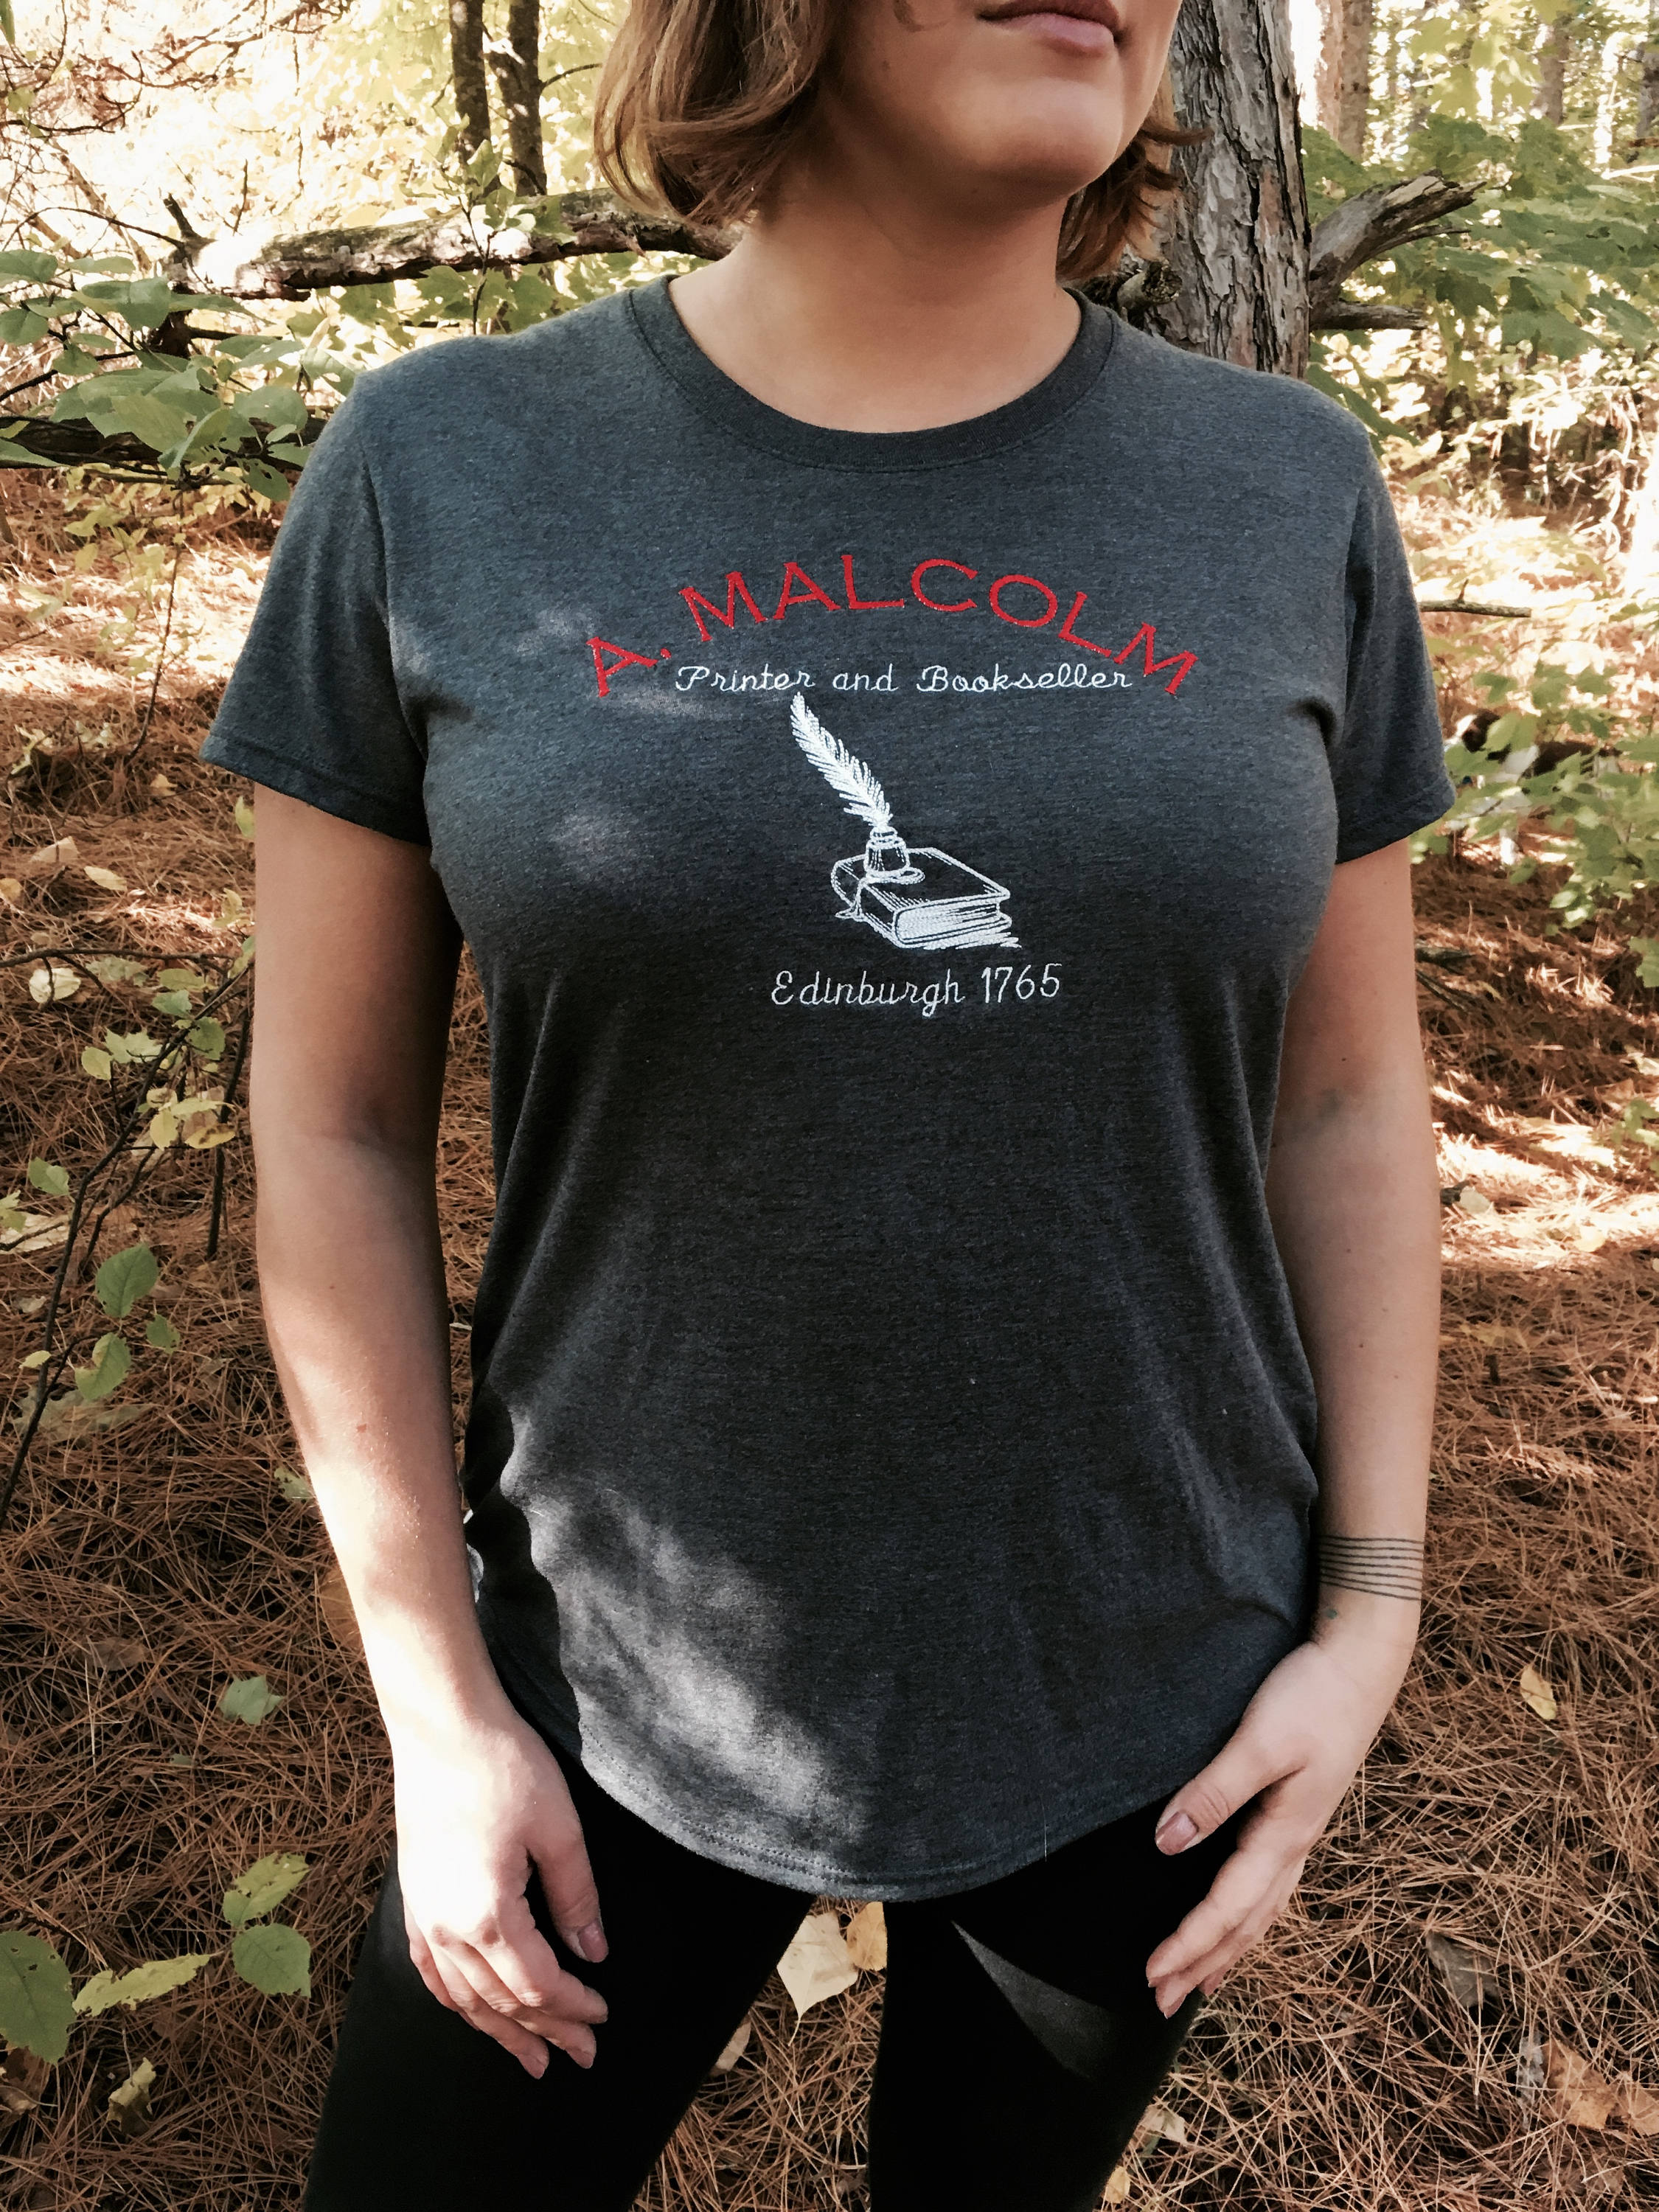 A. Malcolm Printer and Bookseller Embroidered Tee Bookish | Etsy